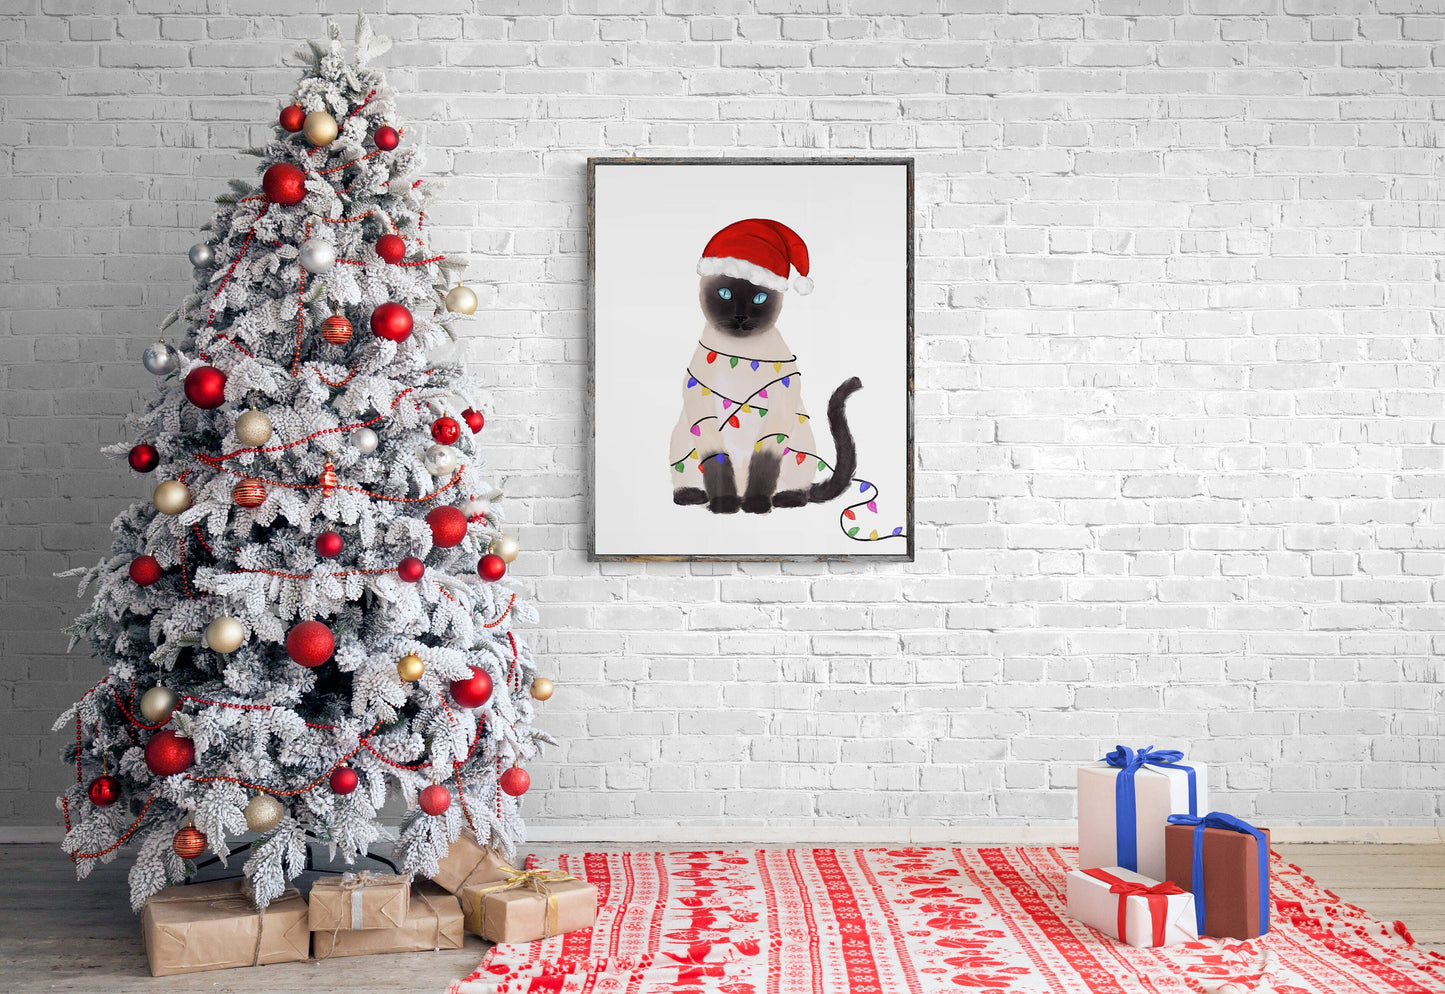 Christmas Siamese Cat Print, Naughty Cat Artwork, Siamese With Xmas Lights, Cat Illustration, Home Decor, Kitten Painting, Cat Lover Gift